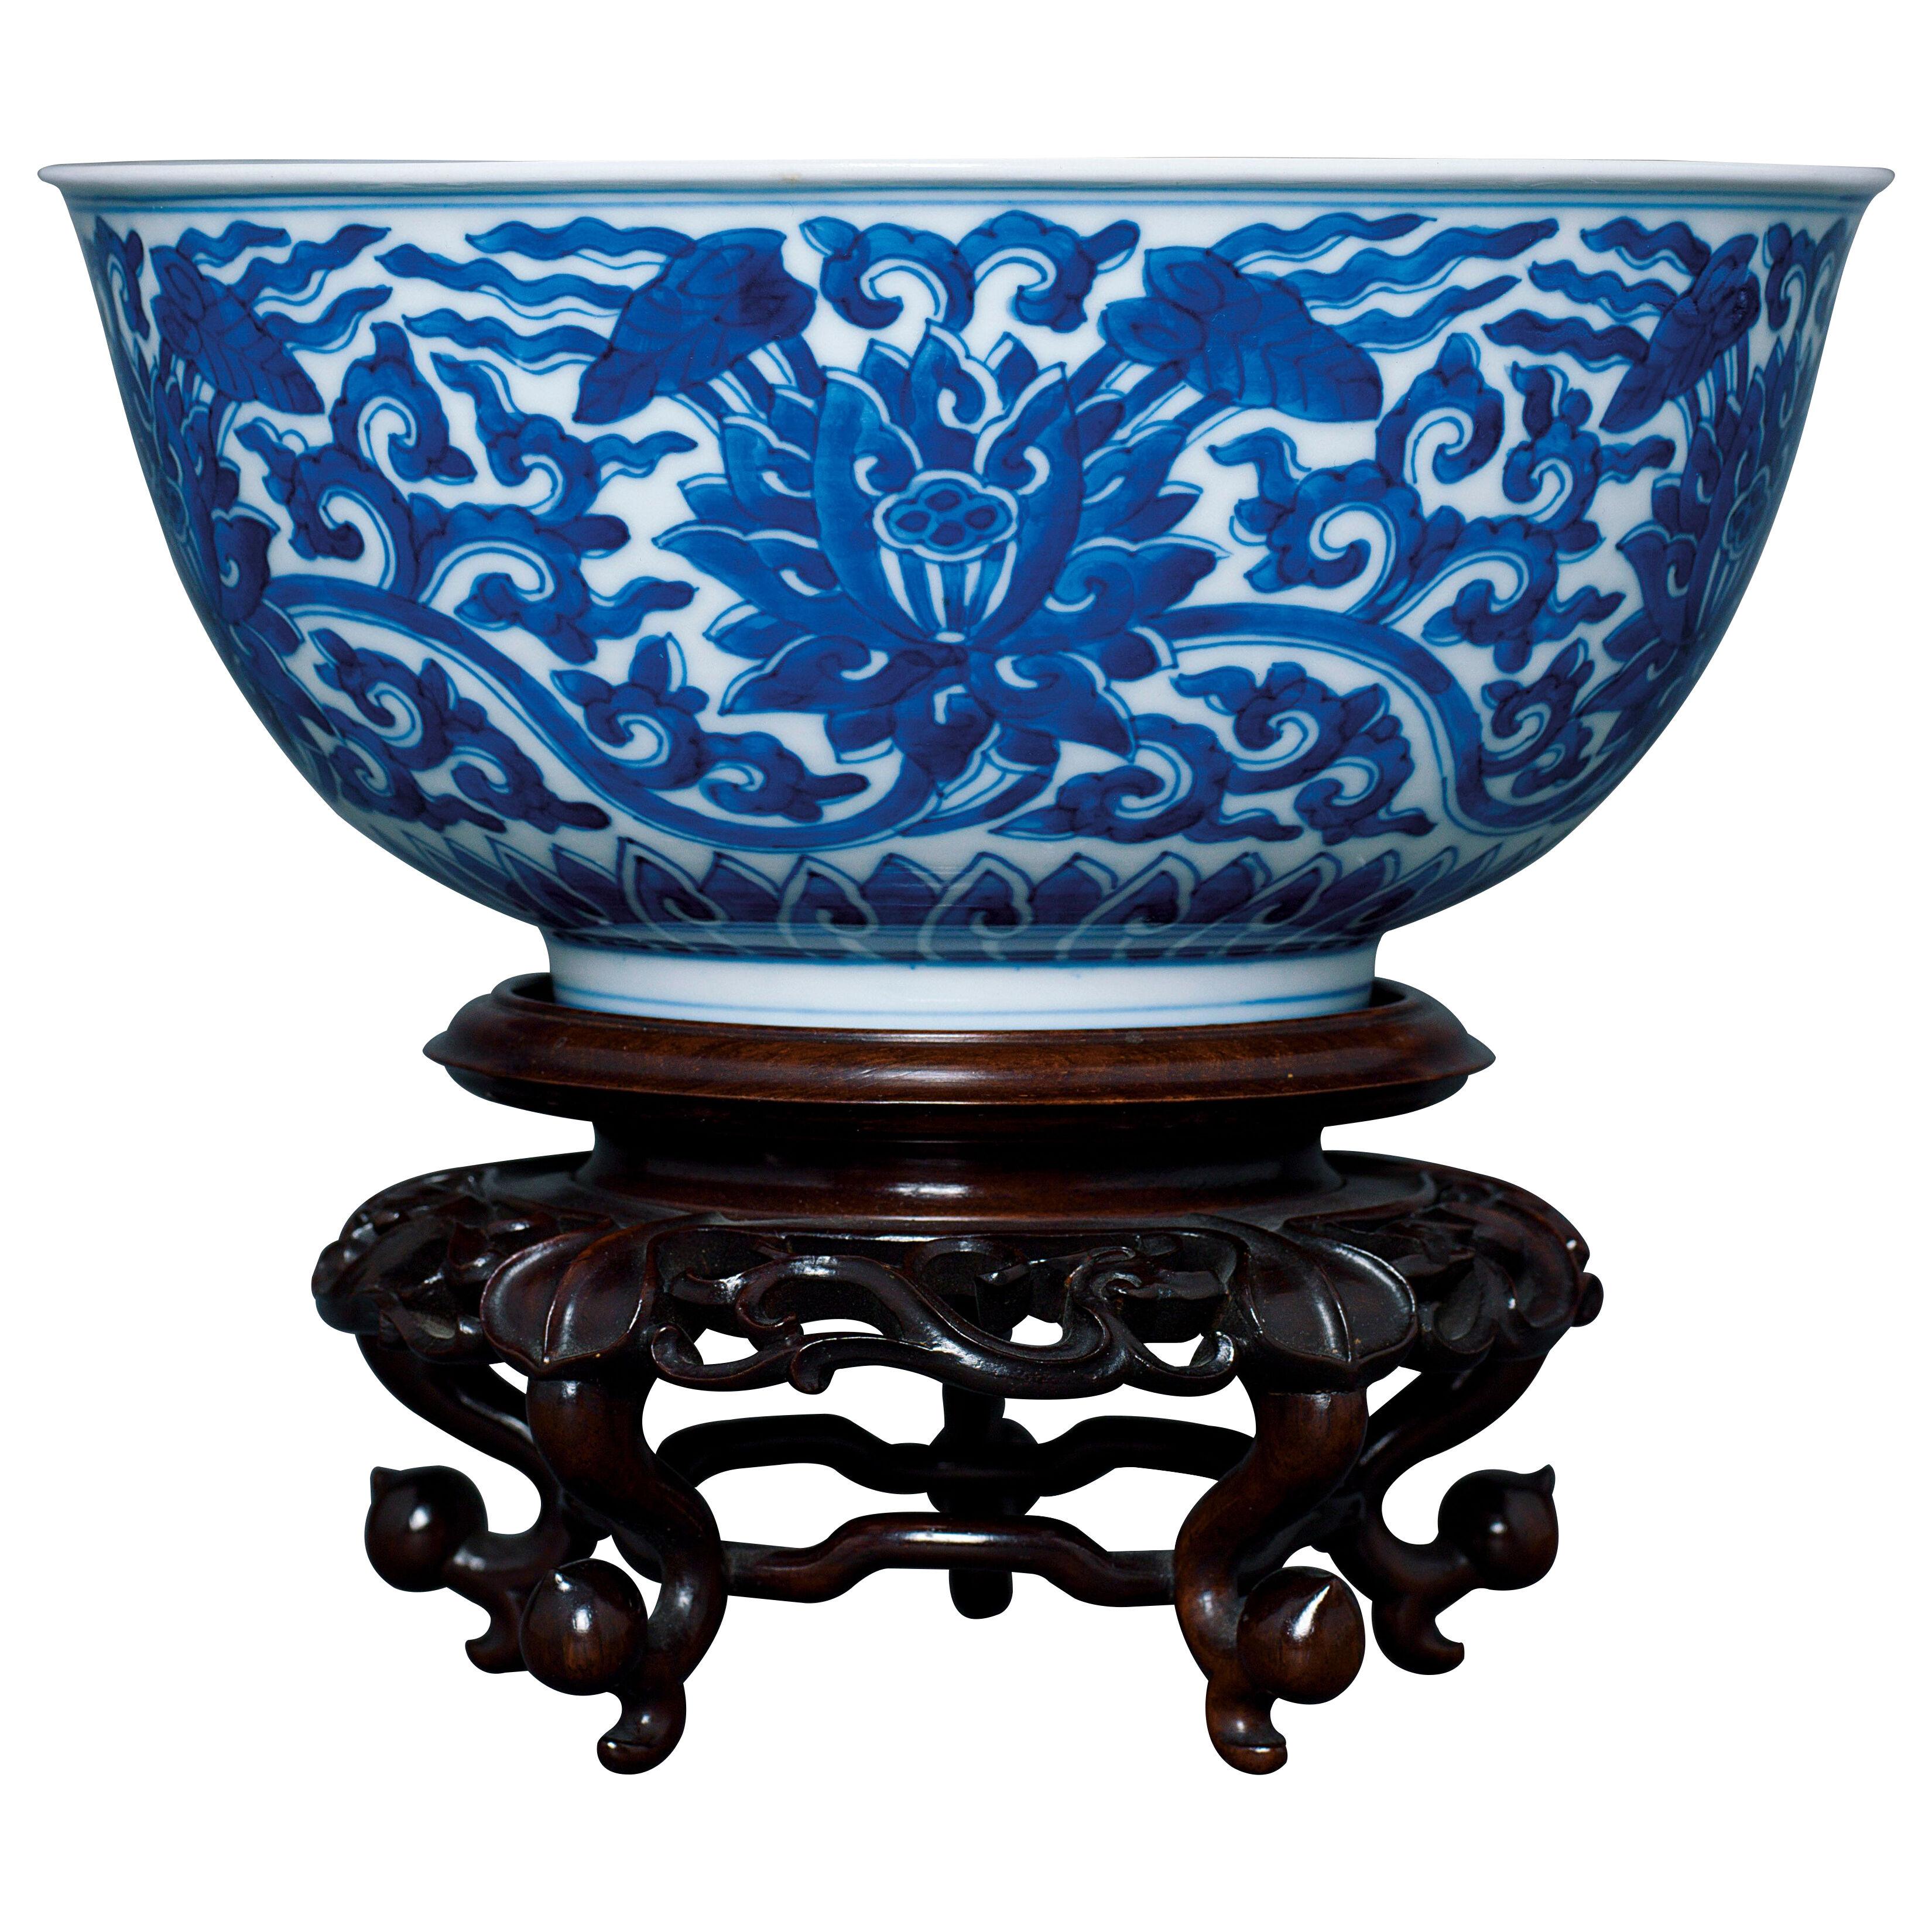 Chinese imperial porcelain blue and white palace bowl, wan